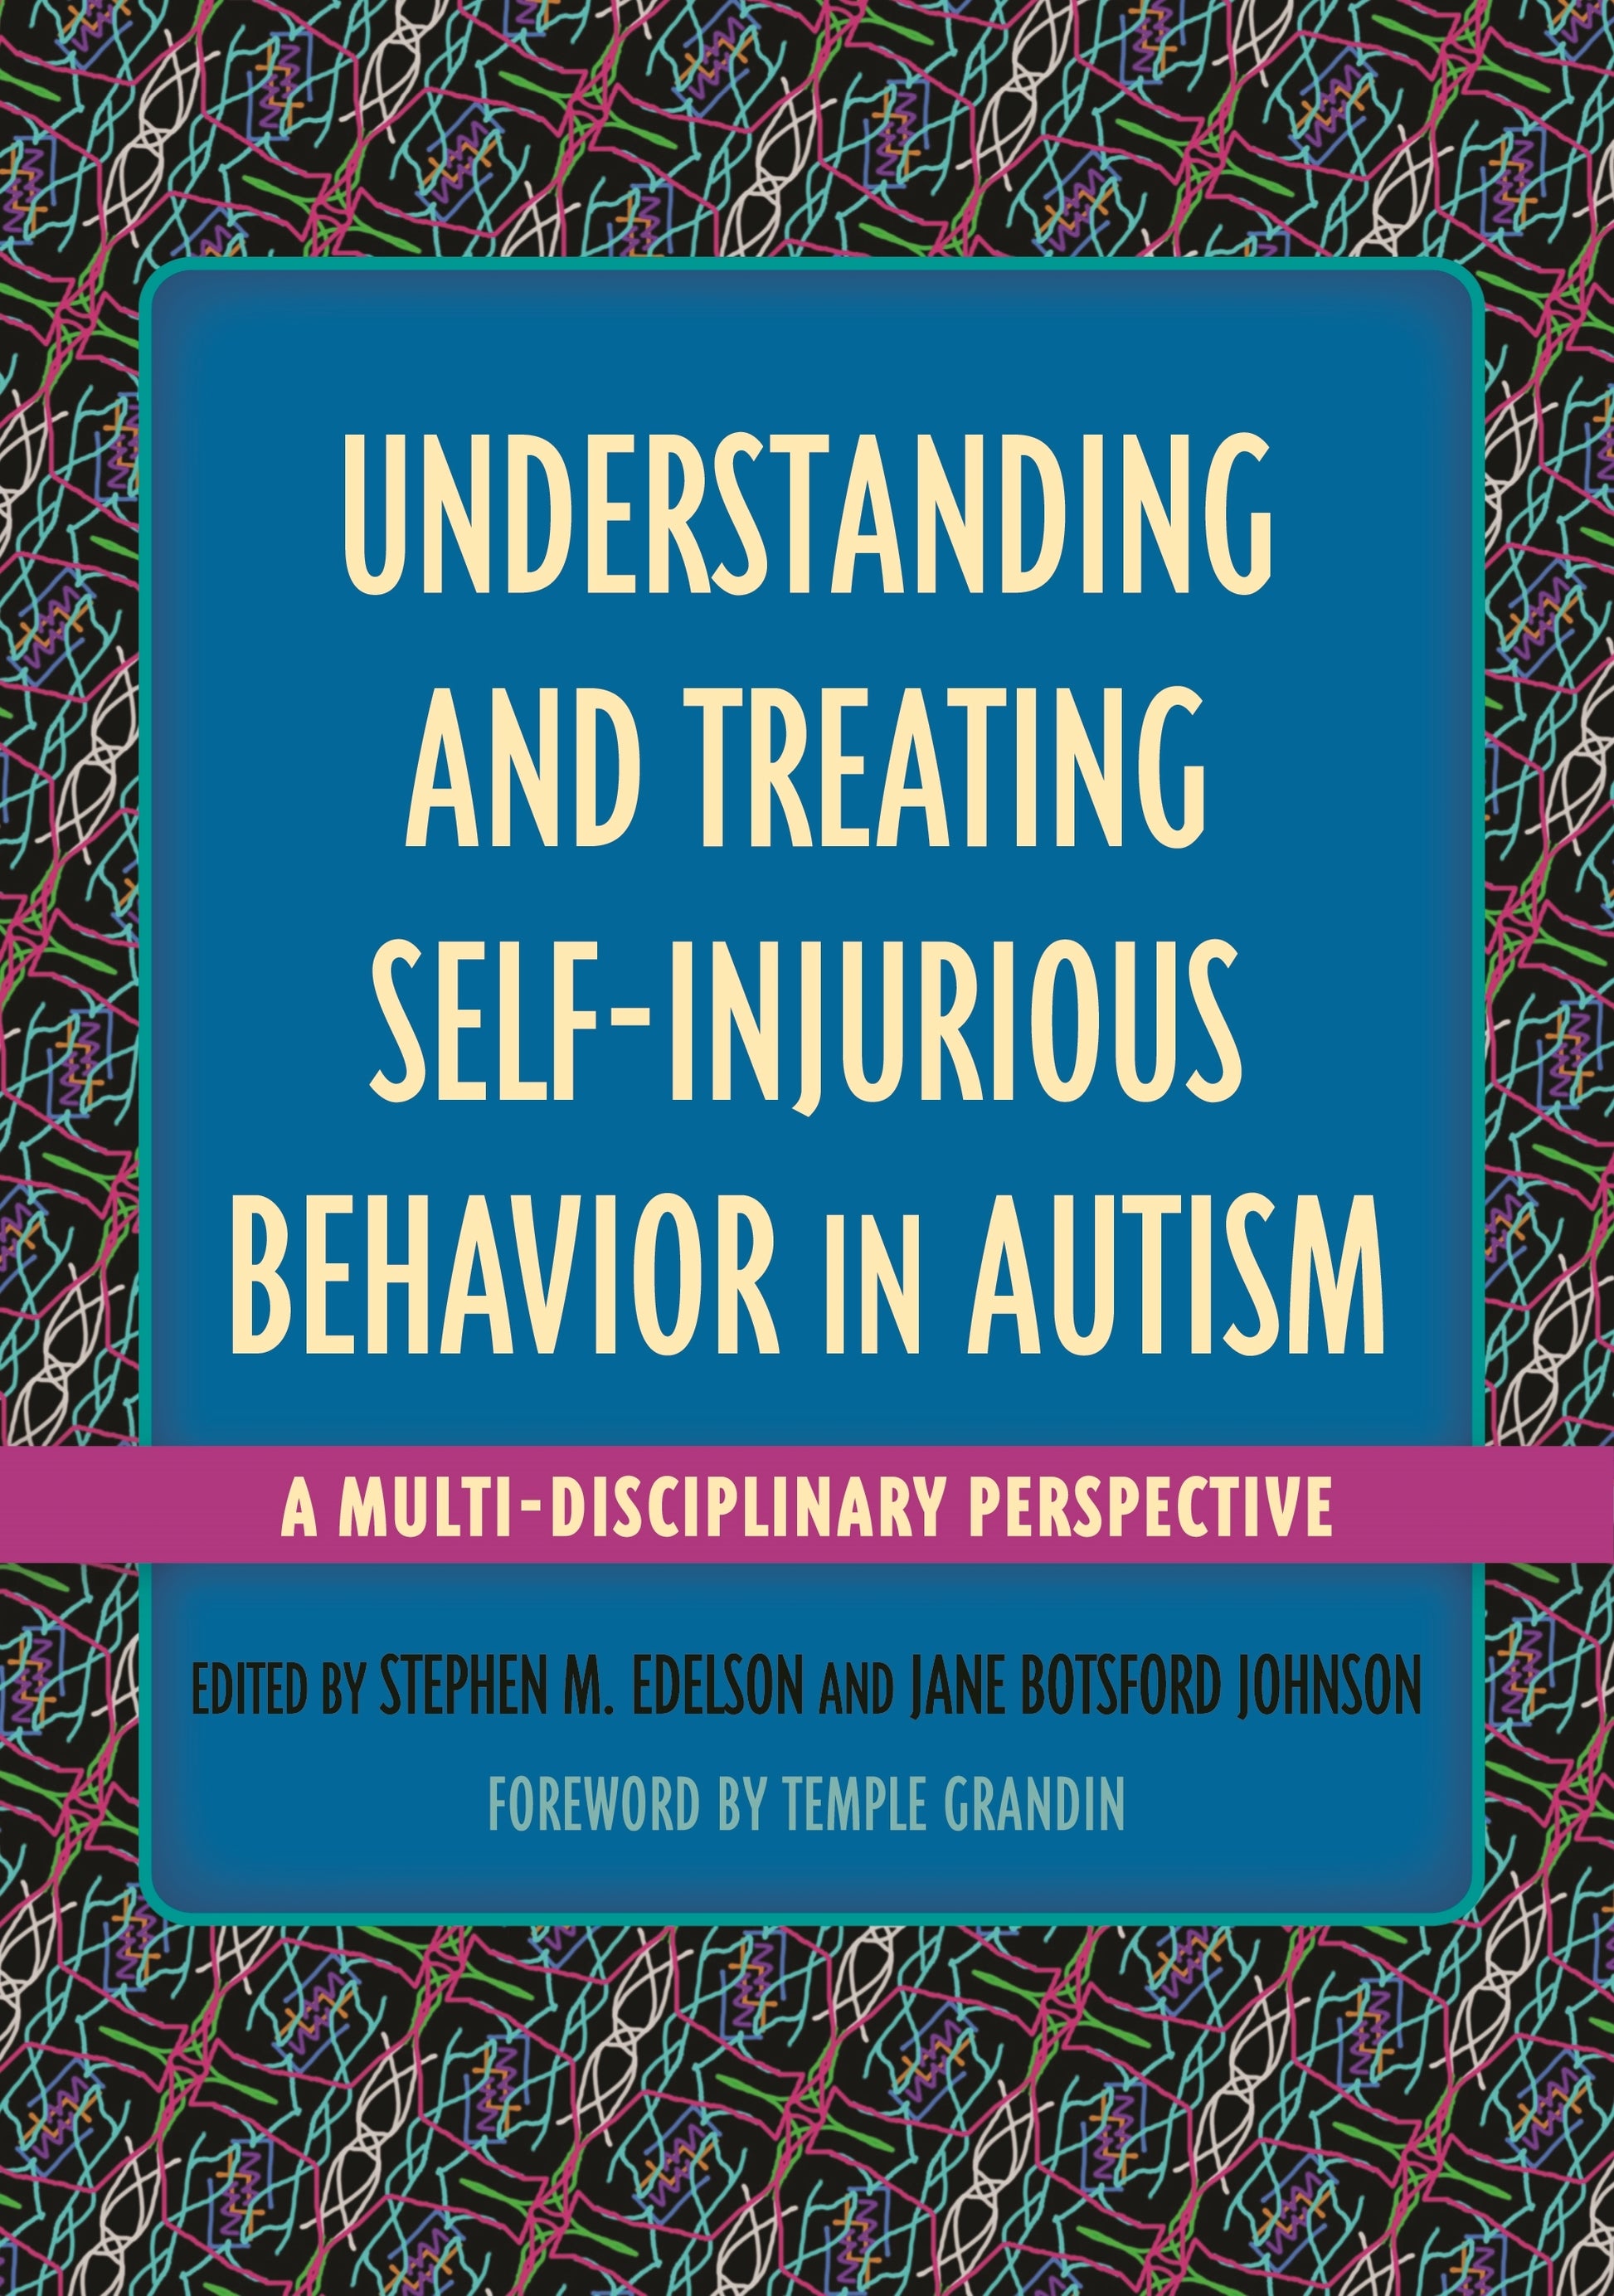 Understanding and Treating Self-Injurious Behavior in Autism by Stephen M. Edelson, Jane Botsford Johnson, Temple Grandin, No Author Listed